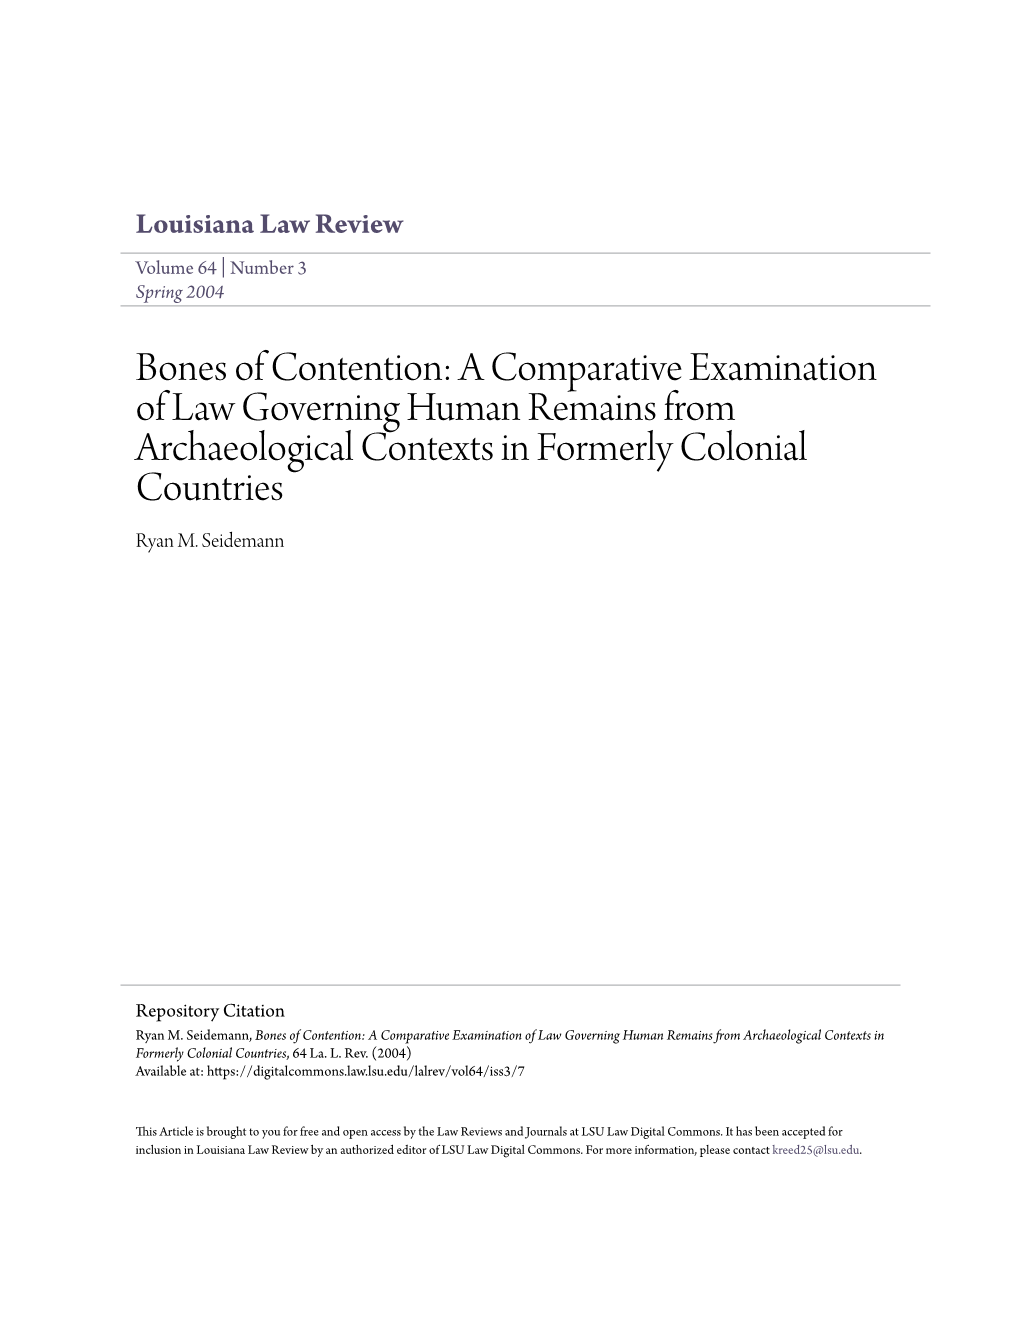 Bones of Contention: a Comparative Examination of Law Governing Human Remains from Archaeological Contexts in Formerly Colonial Countries Ryan M